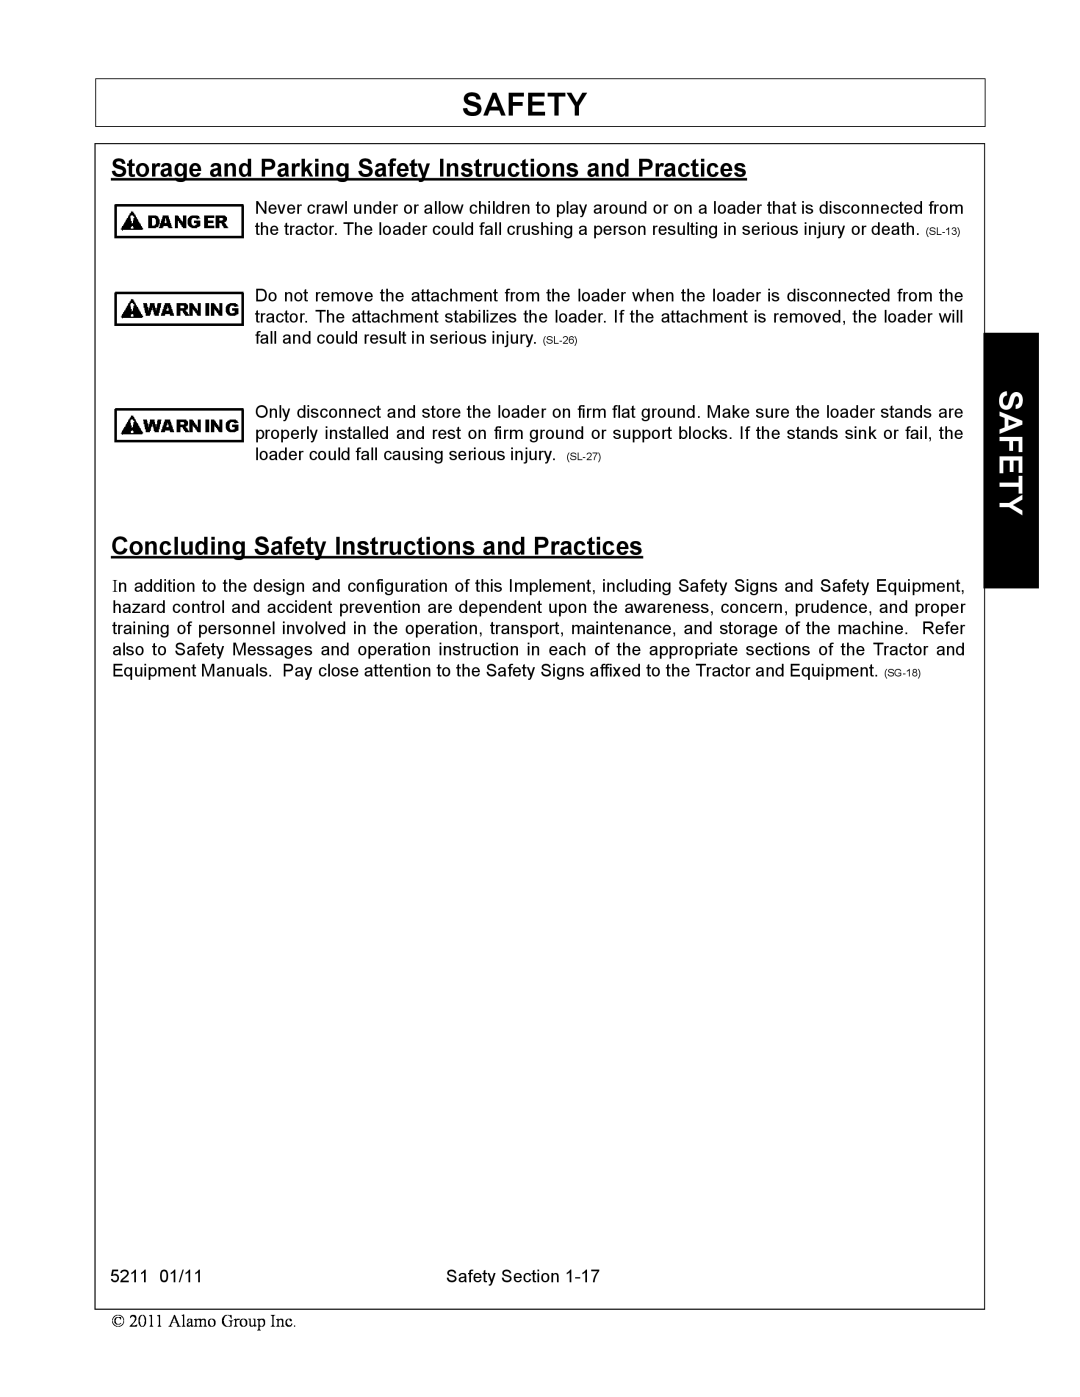 Servis-Rhino 5211 Storage and Parking Safety Instructions and Practices, Concluding Safety Instructions and Practices 